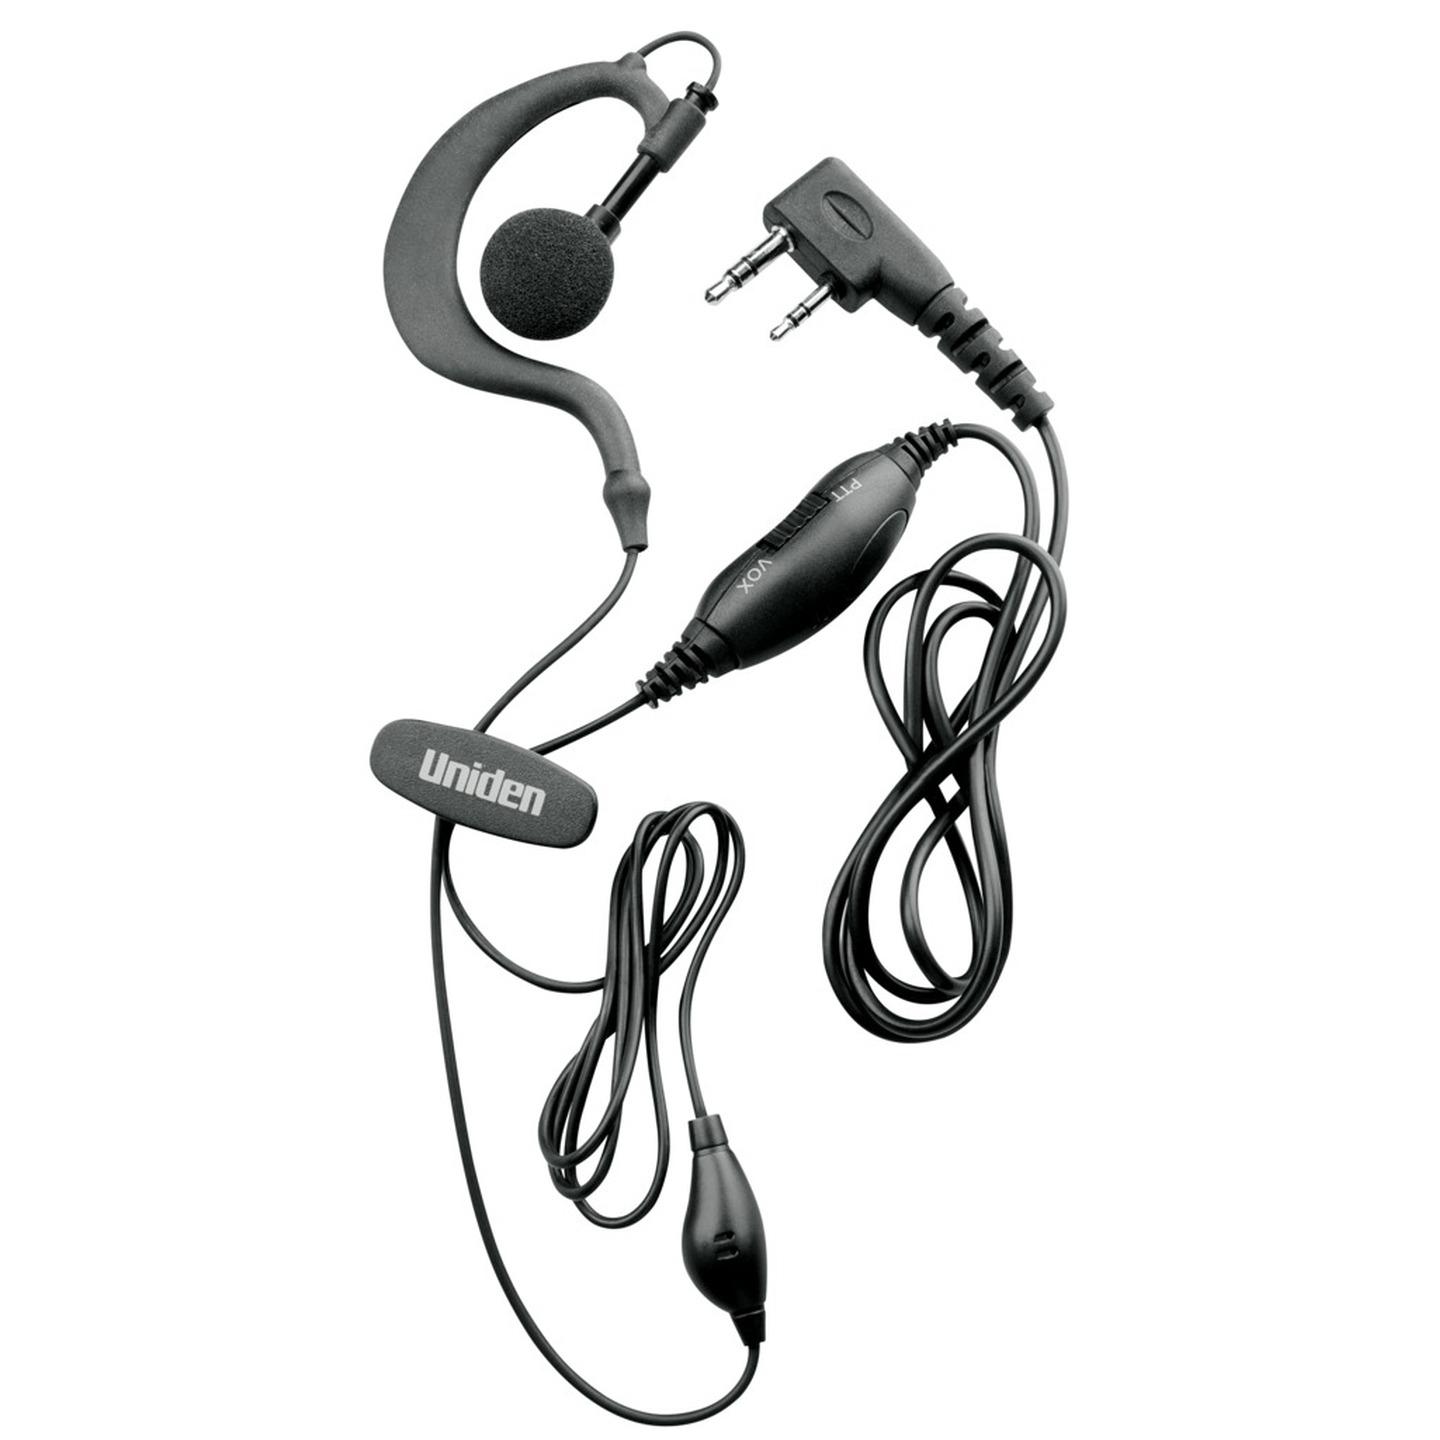 Uniden Earpiece Microphone to suit models UH810S / UH820S / UH835S and UH850S UHF Handheld Radios